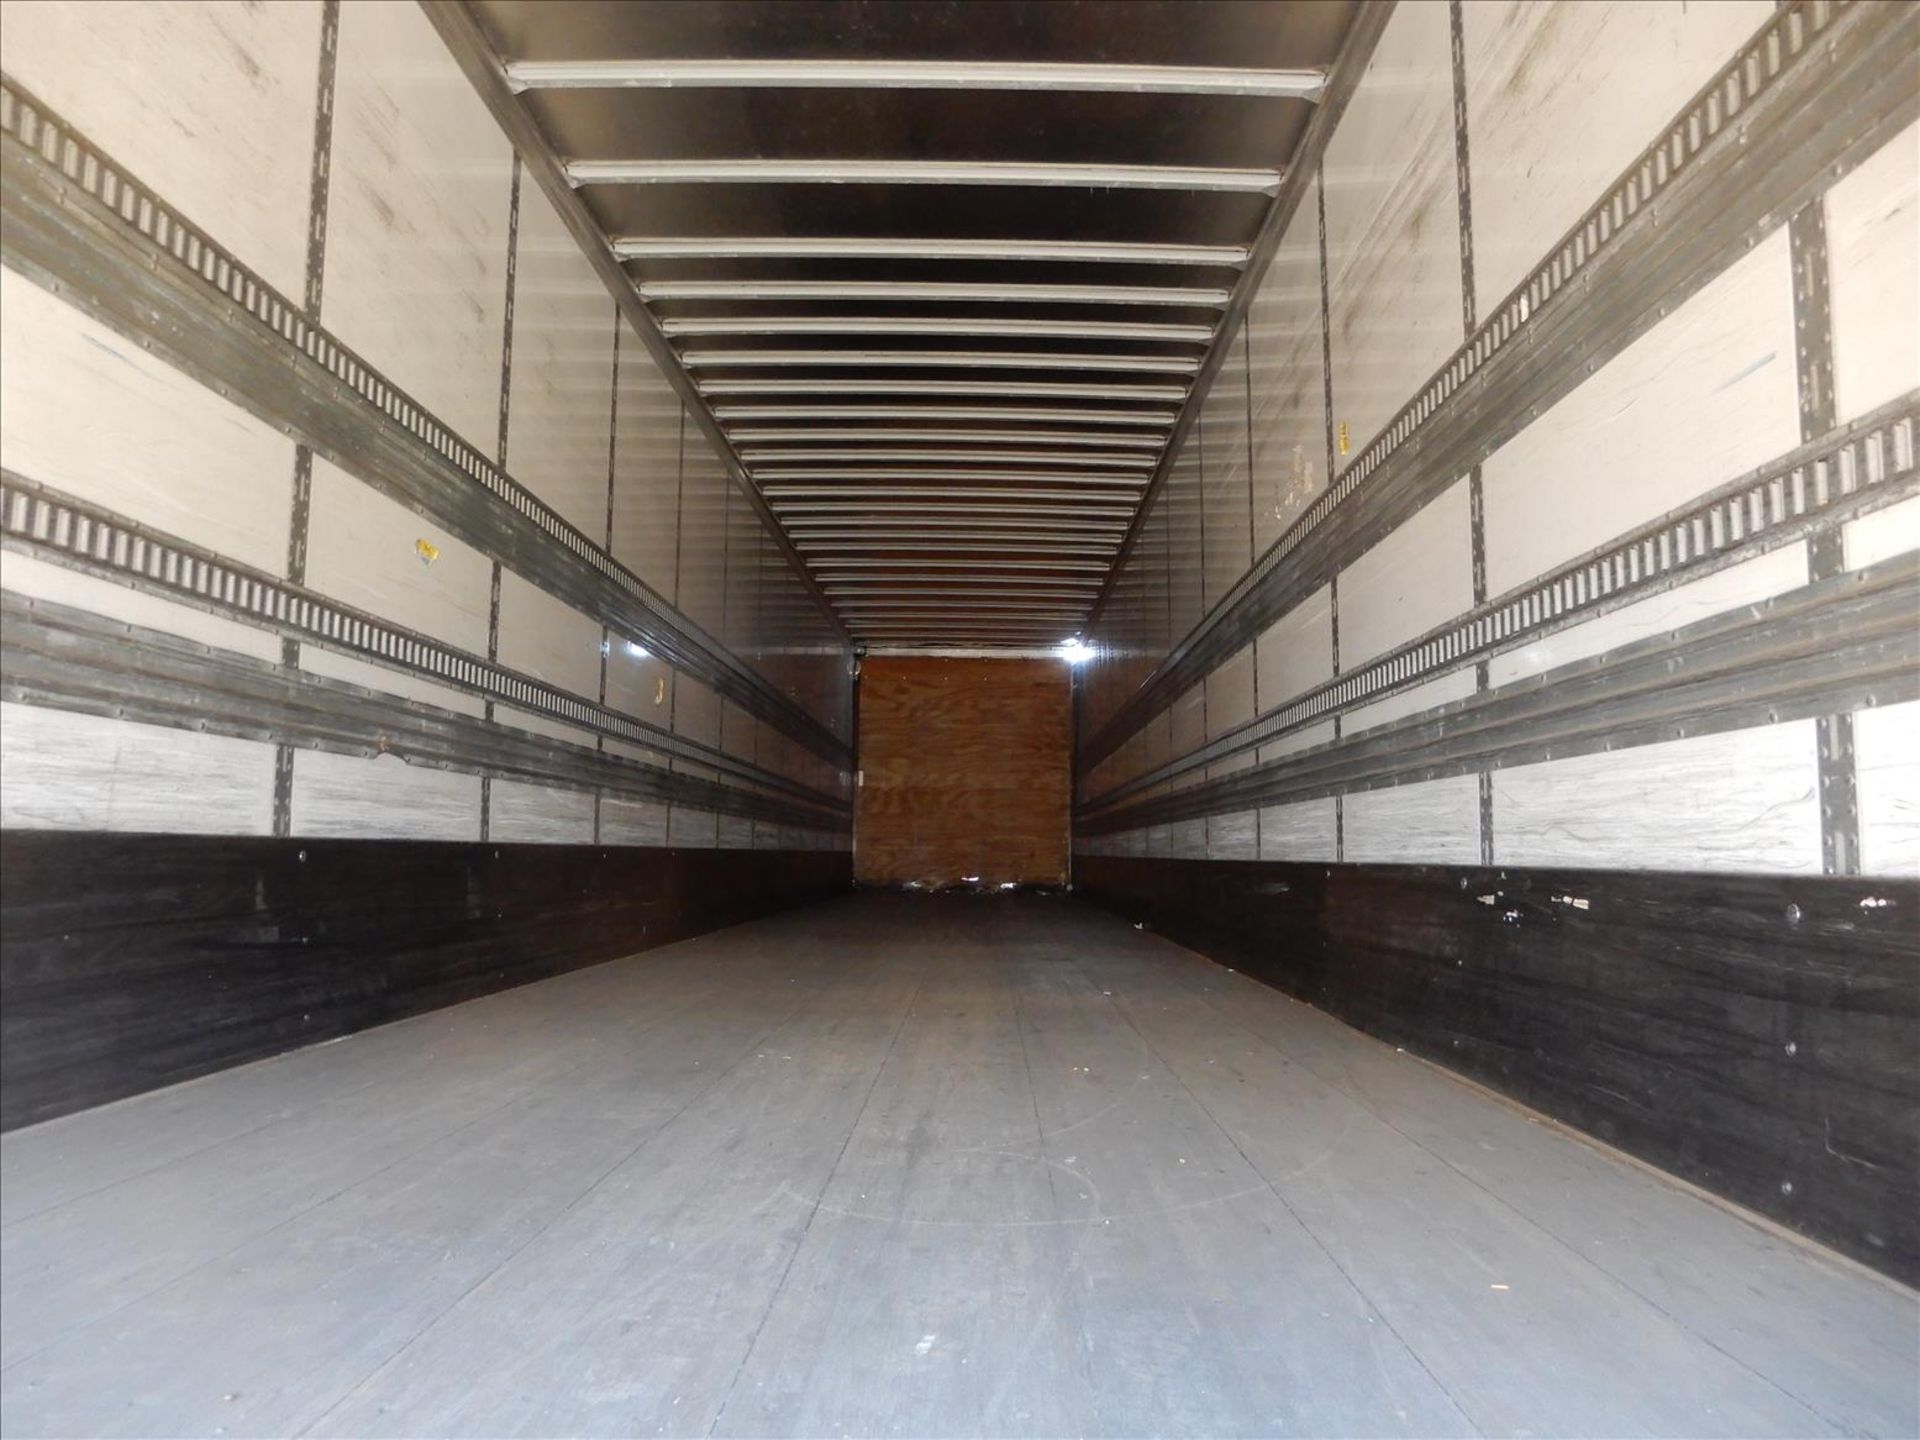 2012 Stoughton Trailer - Located in Indianapolis, IN - Image 22 of 30